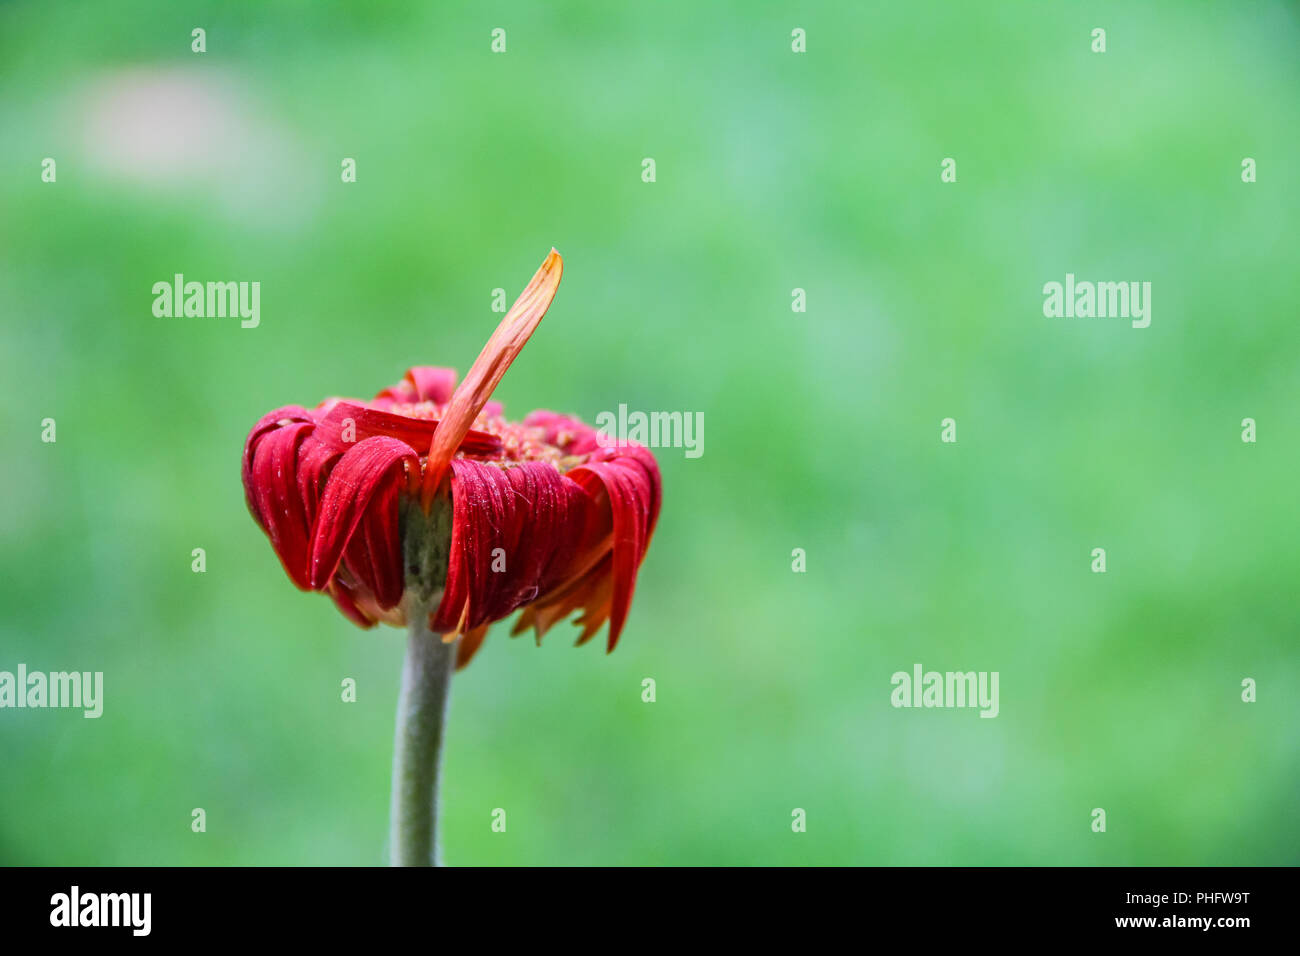 Wilted Flower with a Petal Up Stock Photo